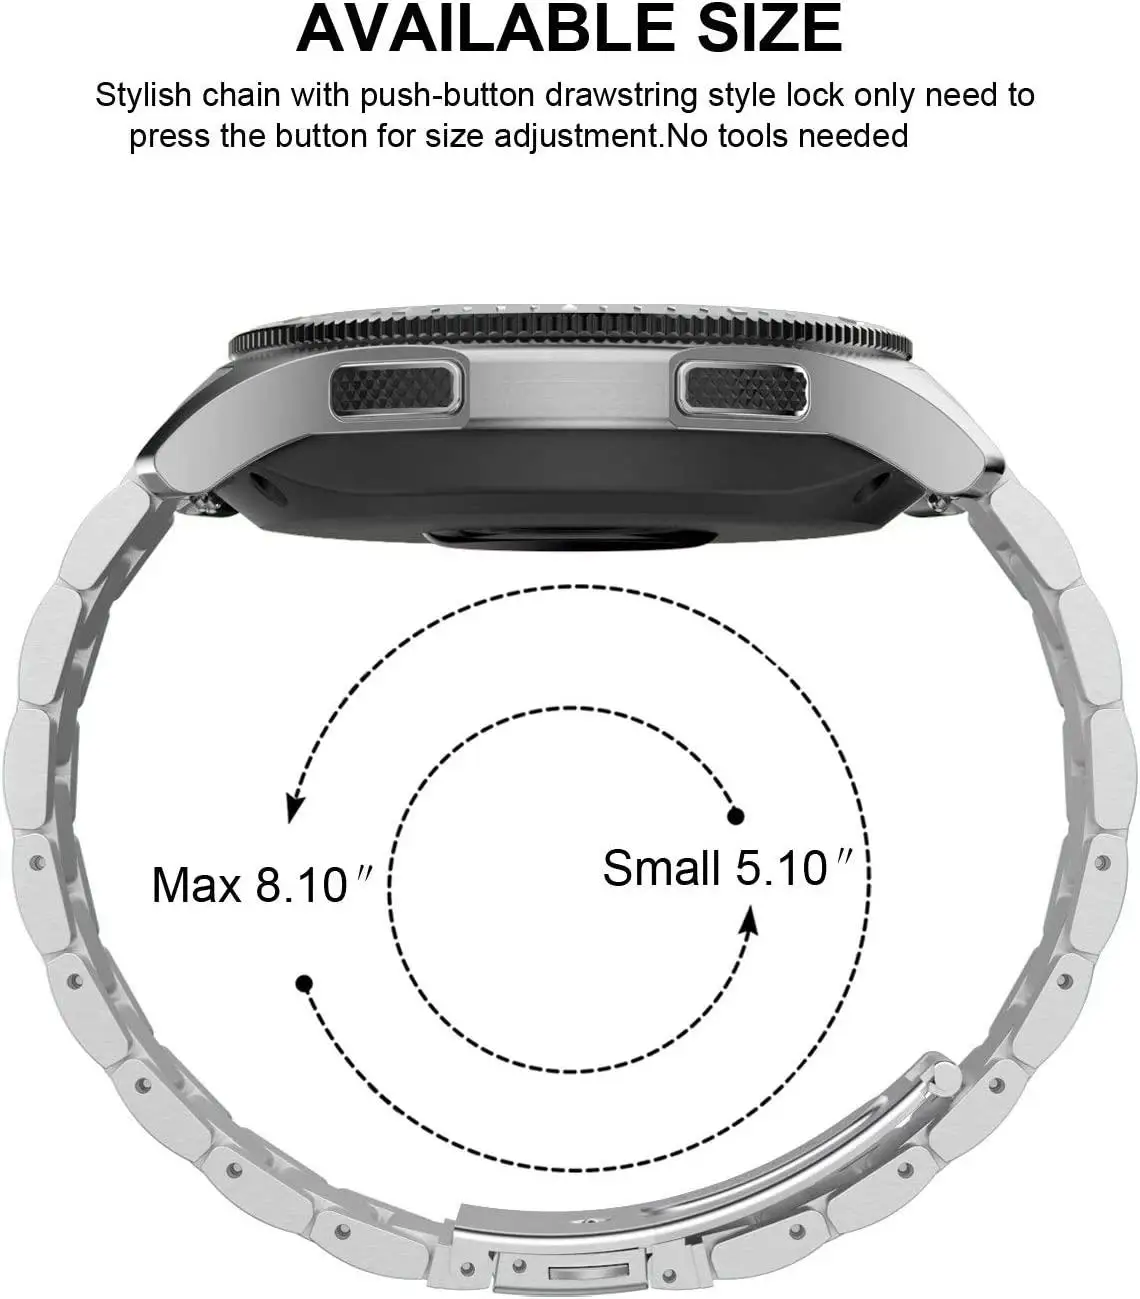 Luxury Metal No Gaps Strap Bracelet For Samsung Galaxy Watch S4 46mm Stainless Steel Wristband For Gear S3 Frontier/Classic Band enlarge